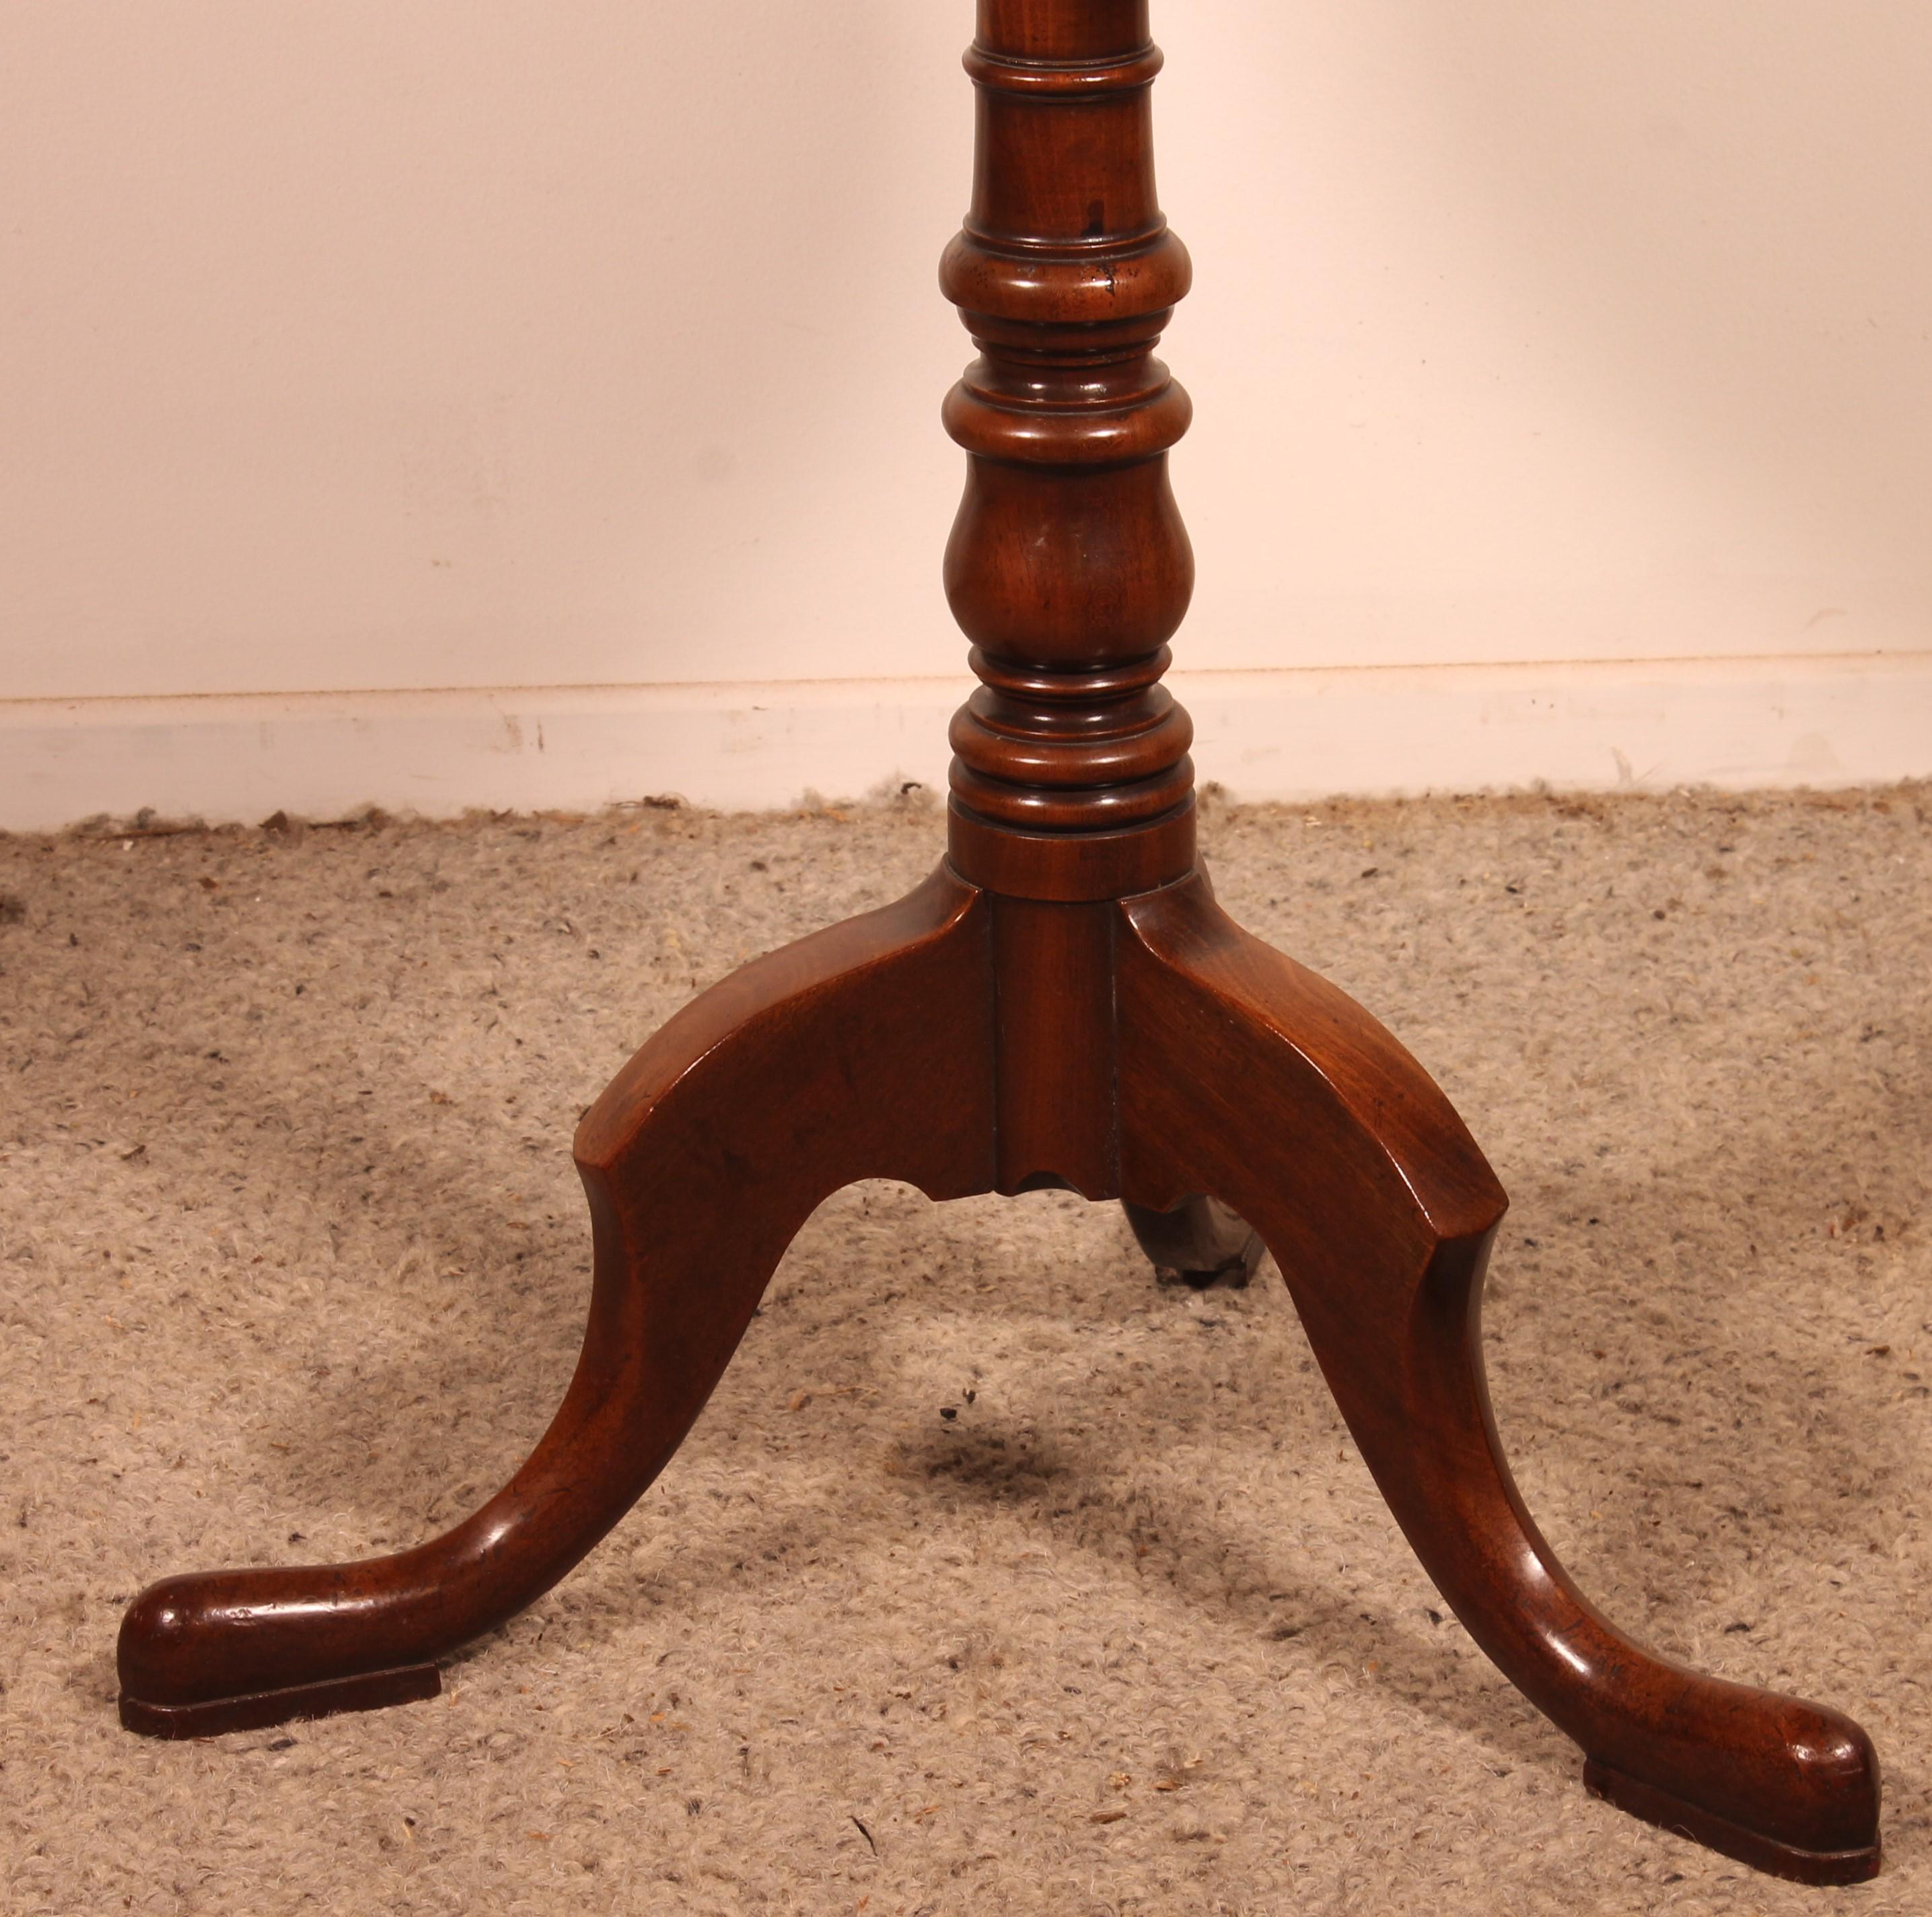 Elegant English pedestal table or tripod table in solid mahogany from the beginning of the 19th century circa 1800

Small model which has a superb solid mahogany top with a beautiful flame and a rim carved in the mass which is rare.

The patina of